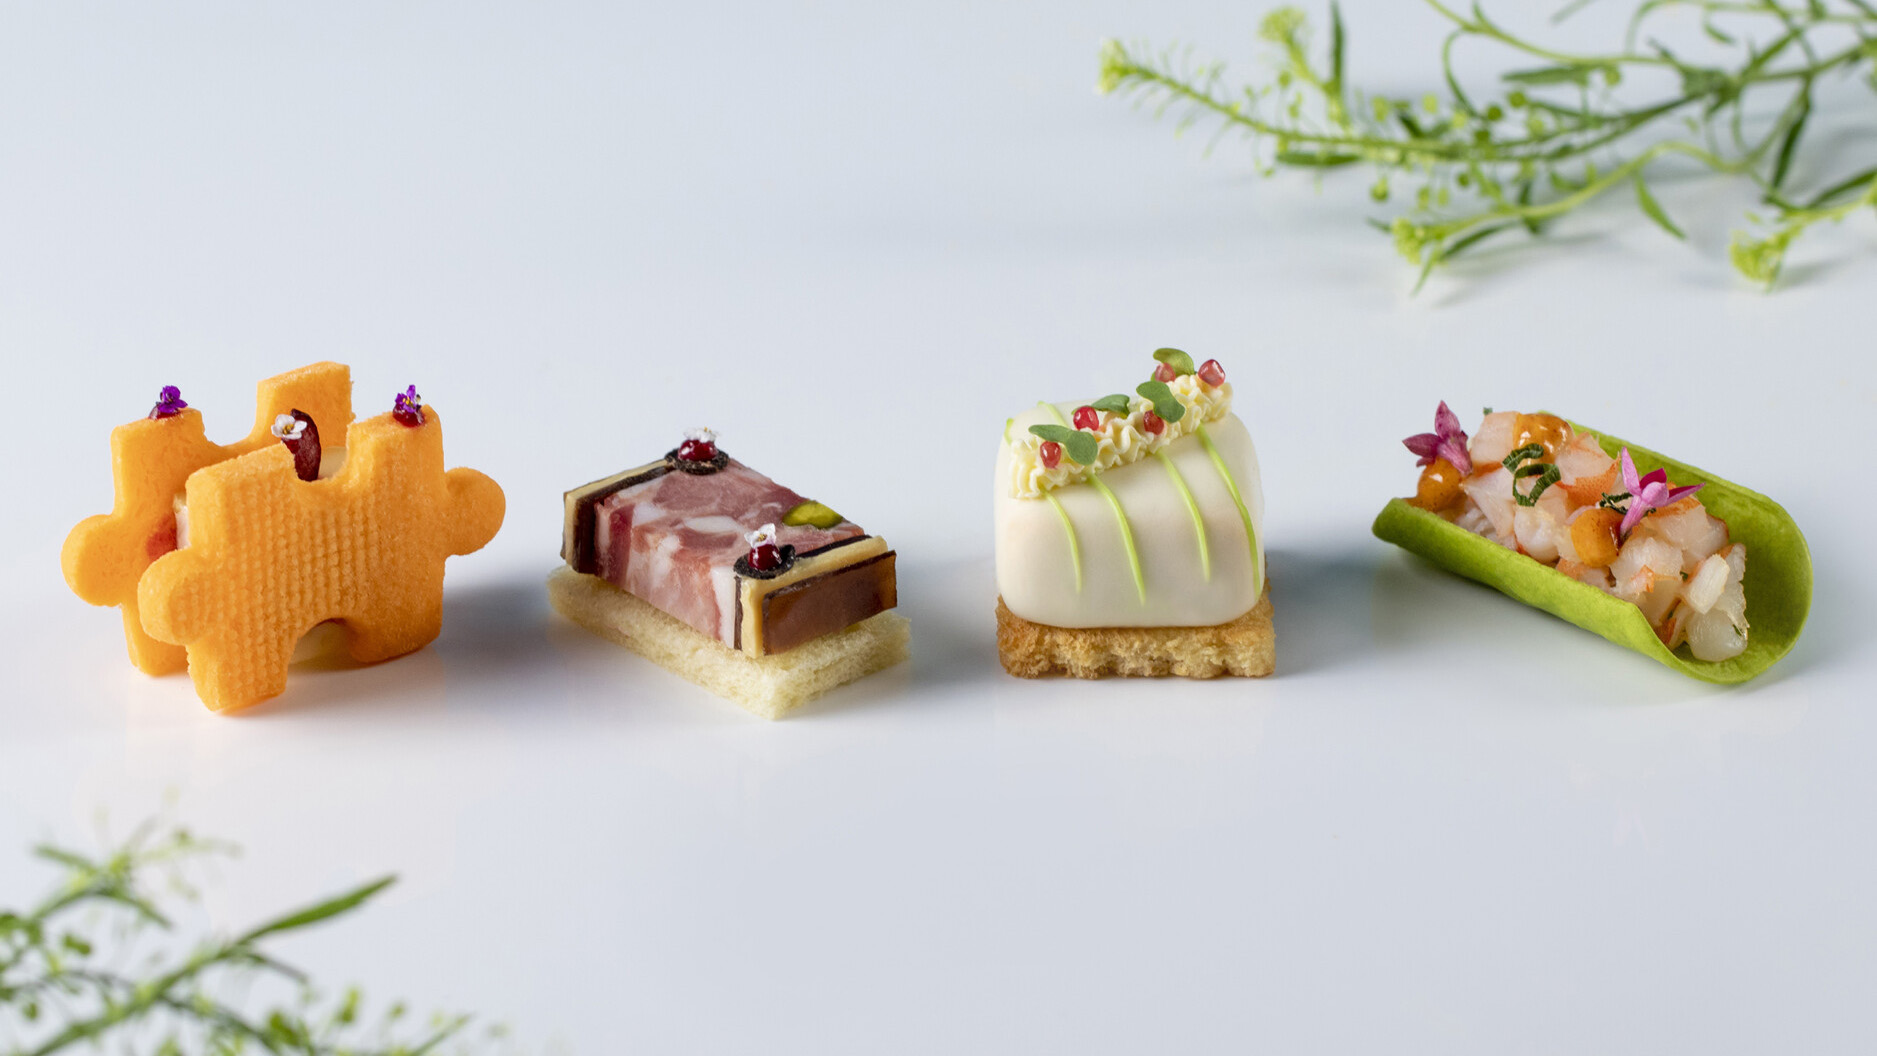 GEORG JENSEN's Spring Blossoms Afternoon Tea at Four Seasons Hotel Beijing